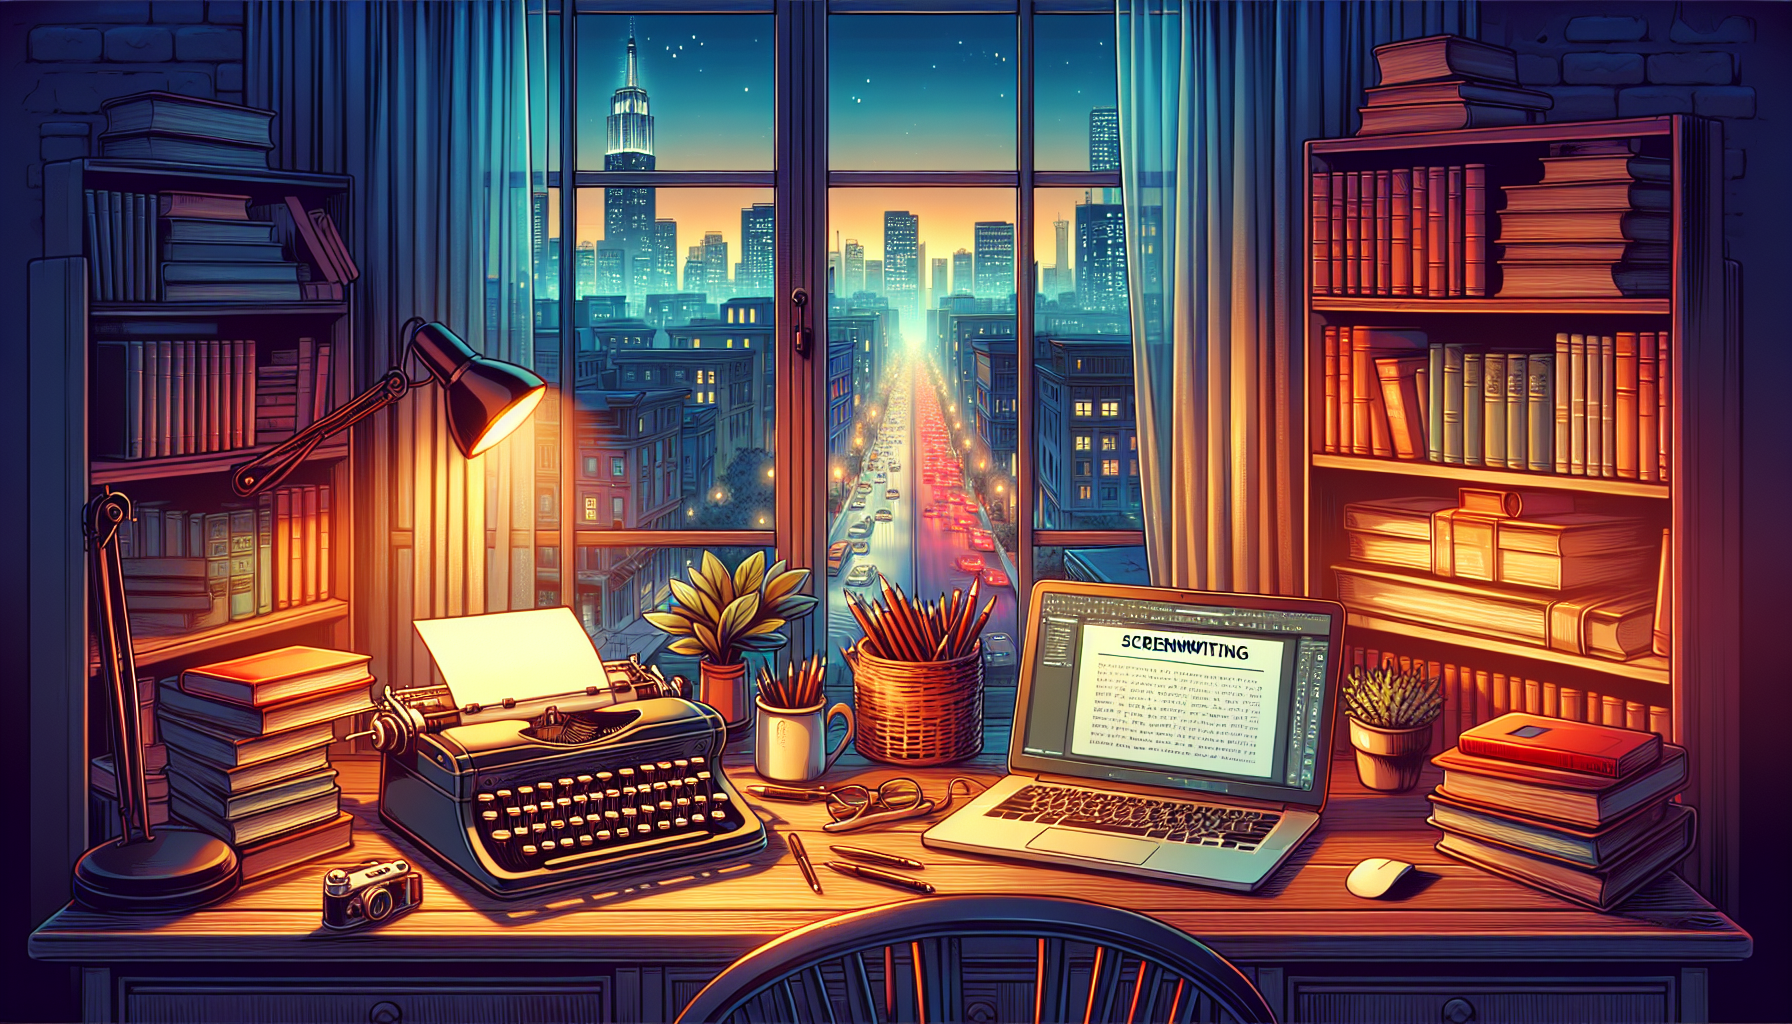 An inviting and cozy writer's nook equipped with a classic typewriter, stacks of screenwriting books, and a modern laptop displaying an online screenwriting tutorial. The room is softly lit, with a window overlooking a bustling cityscape at dusk, capturing the essence of inspiration and creativity for a screenwriter at work.